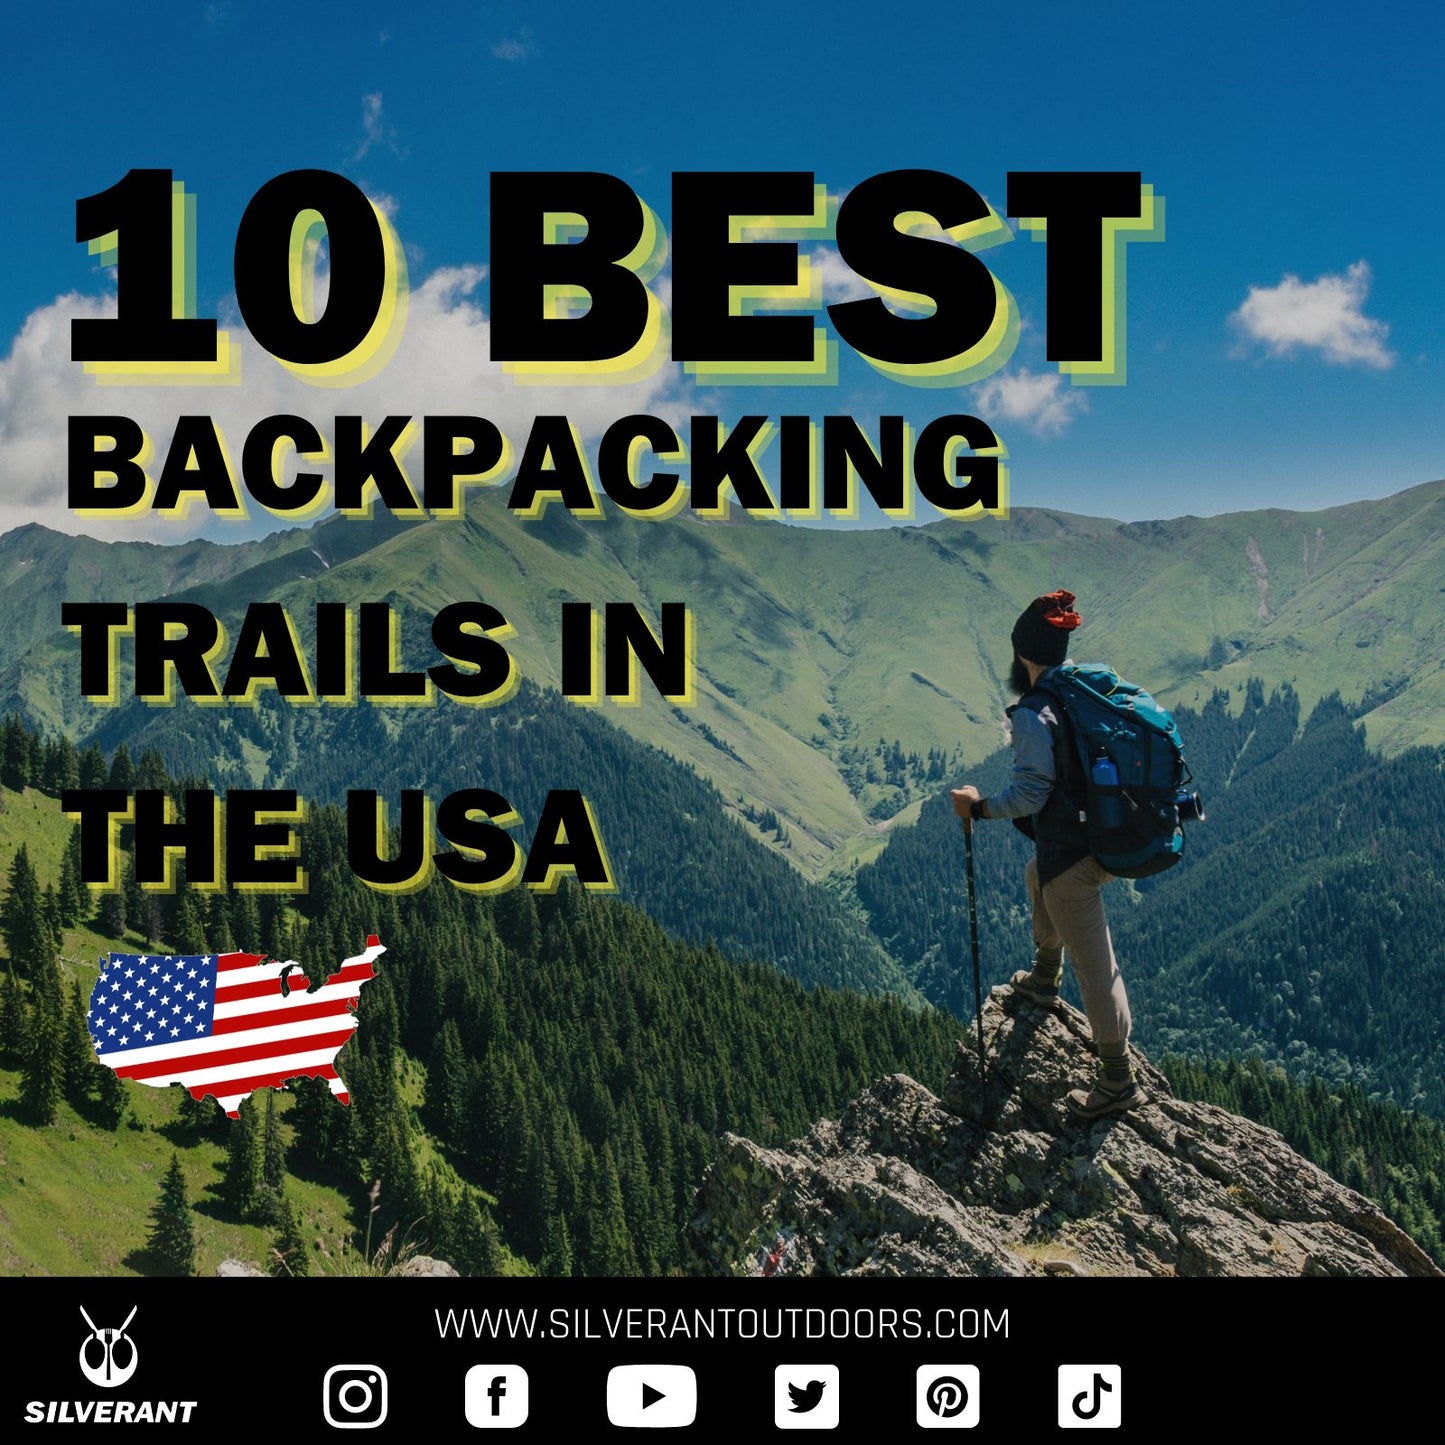 10 BEST BACKPACKING TRAILS IN THE US - 20 TO 100 MILES